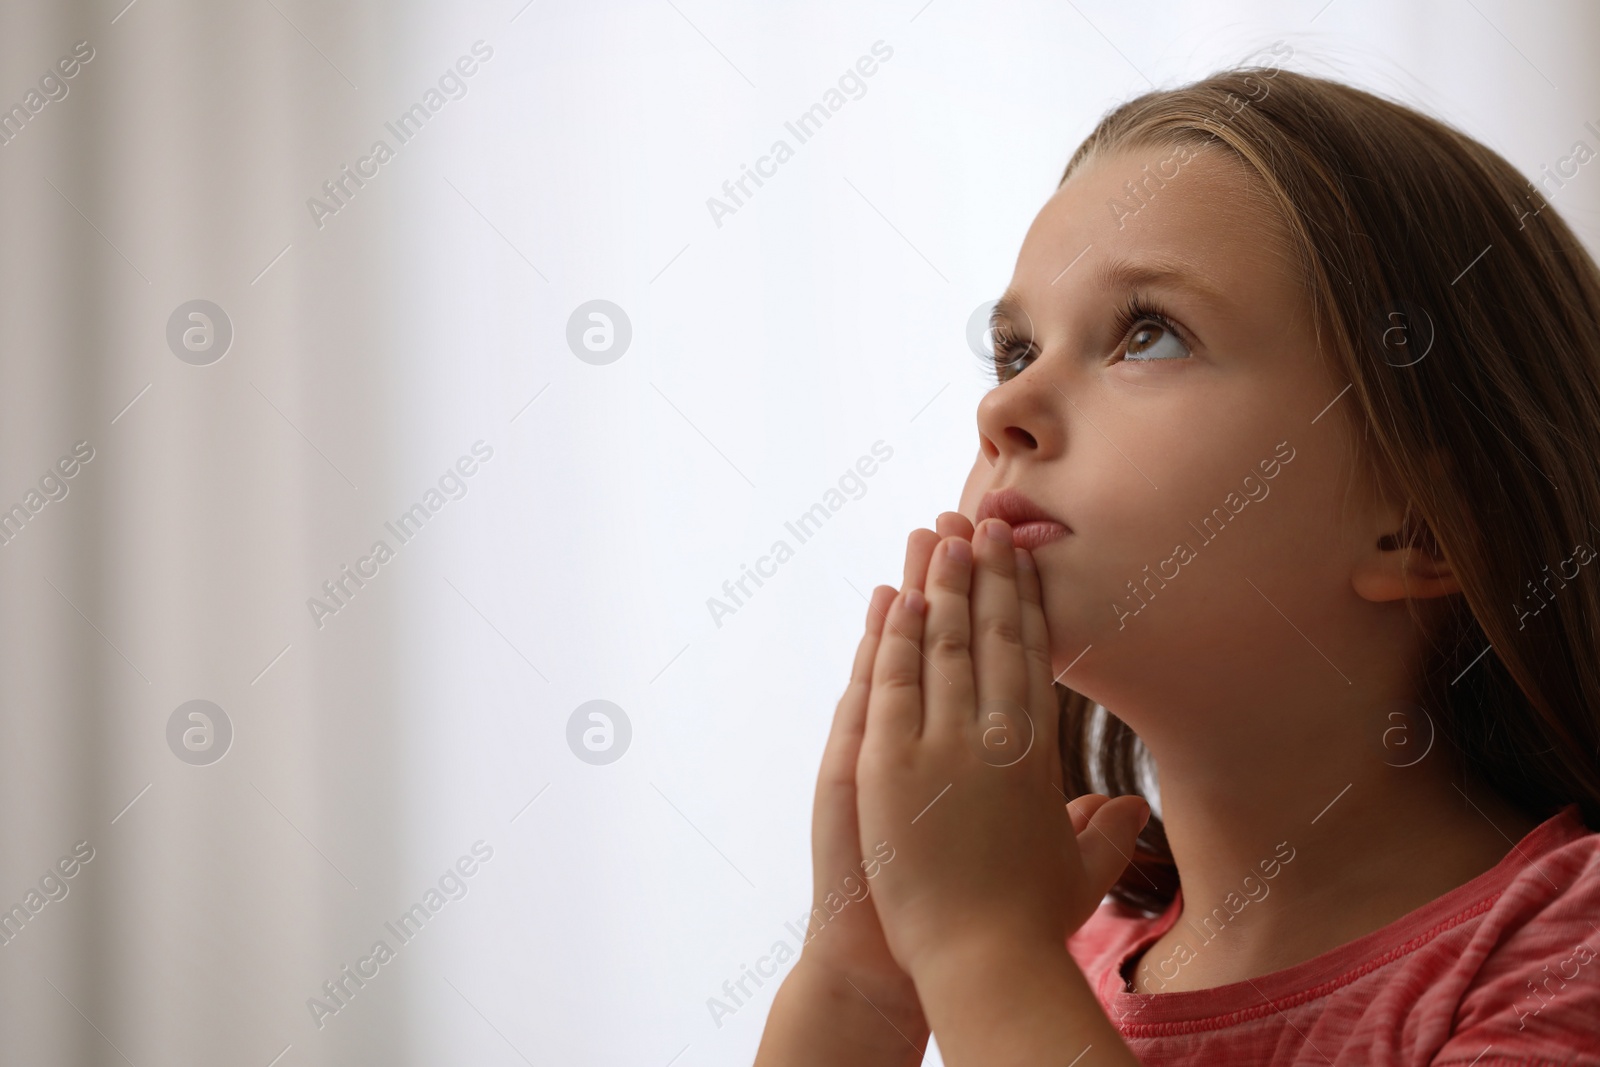 Photo of Cute little girl with hands clasped together praying on blurred background. Space for text